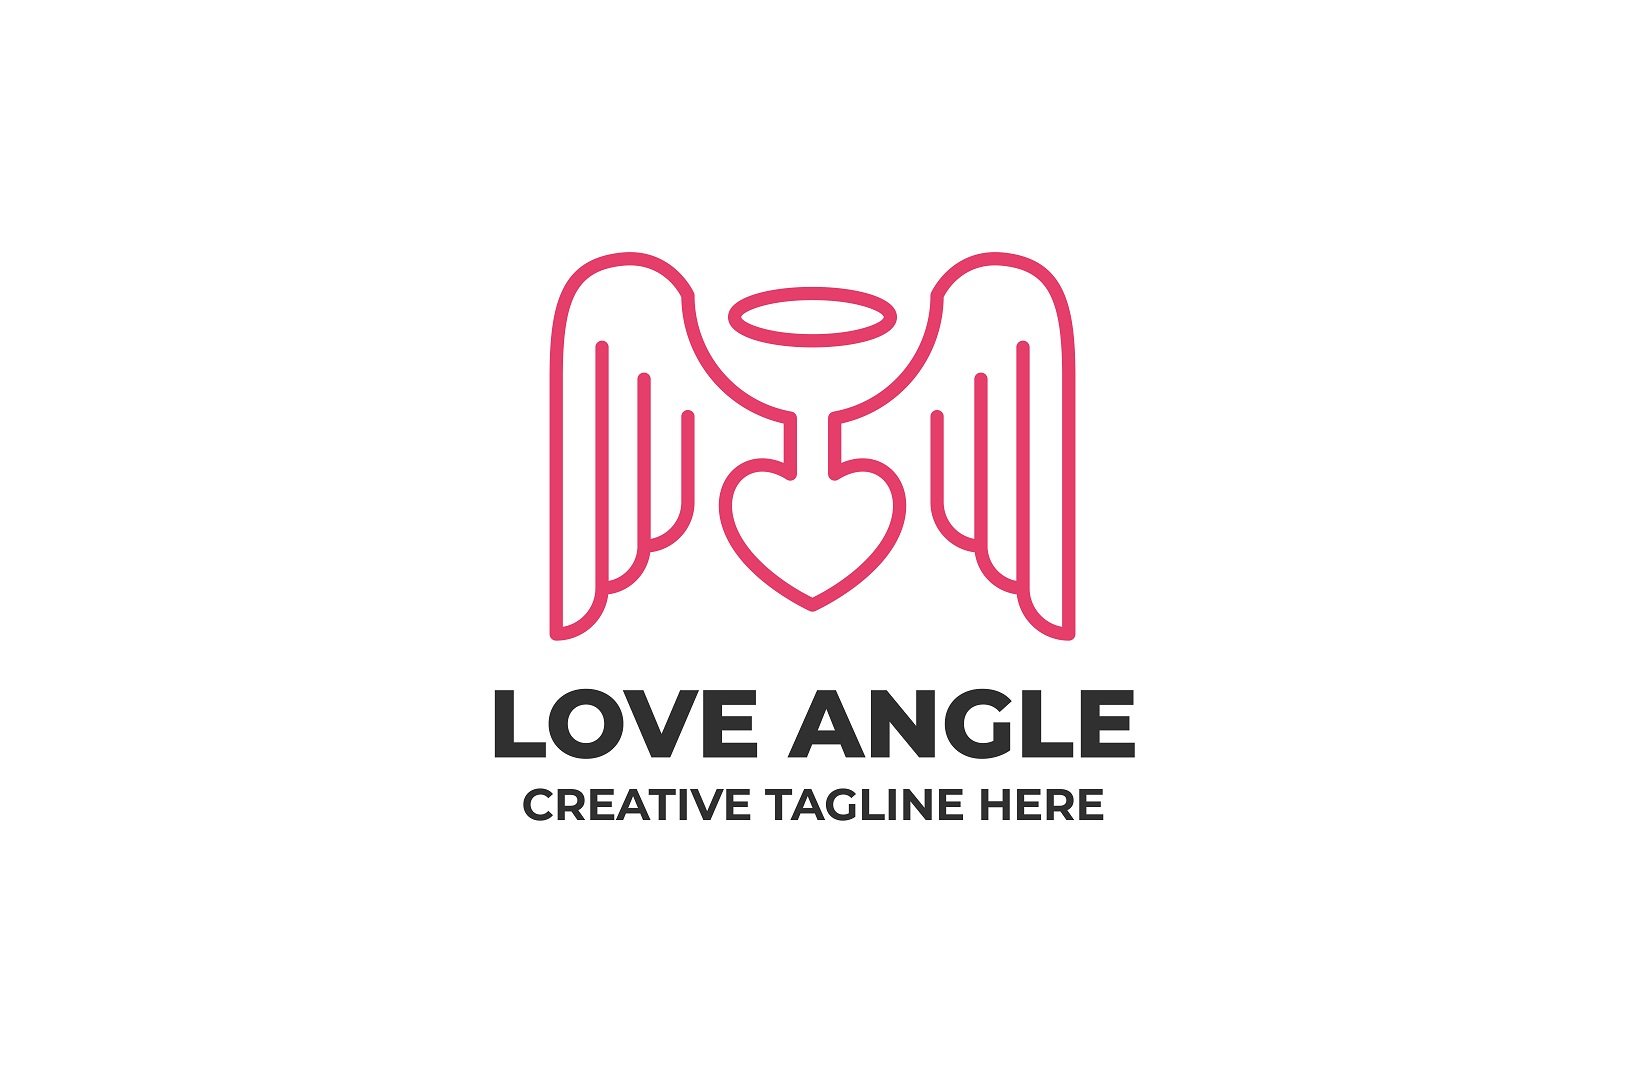 Heart Wing Monoline Logo Template cover image.